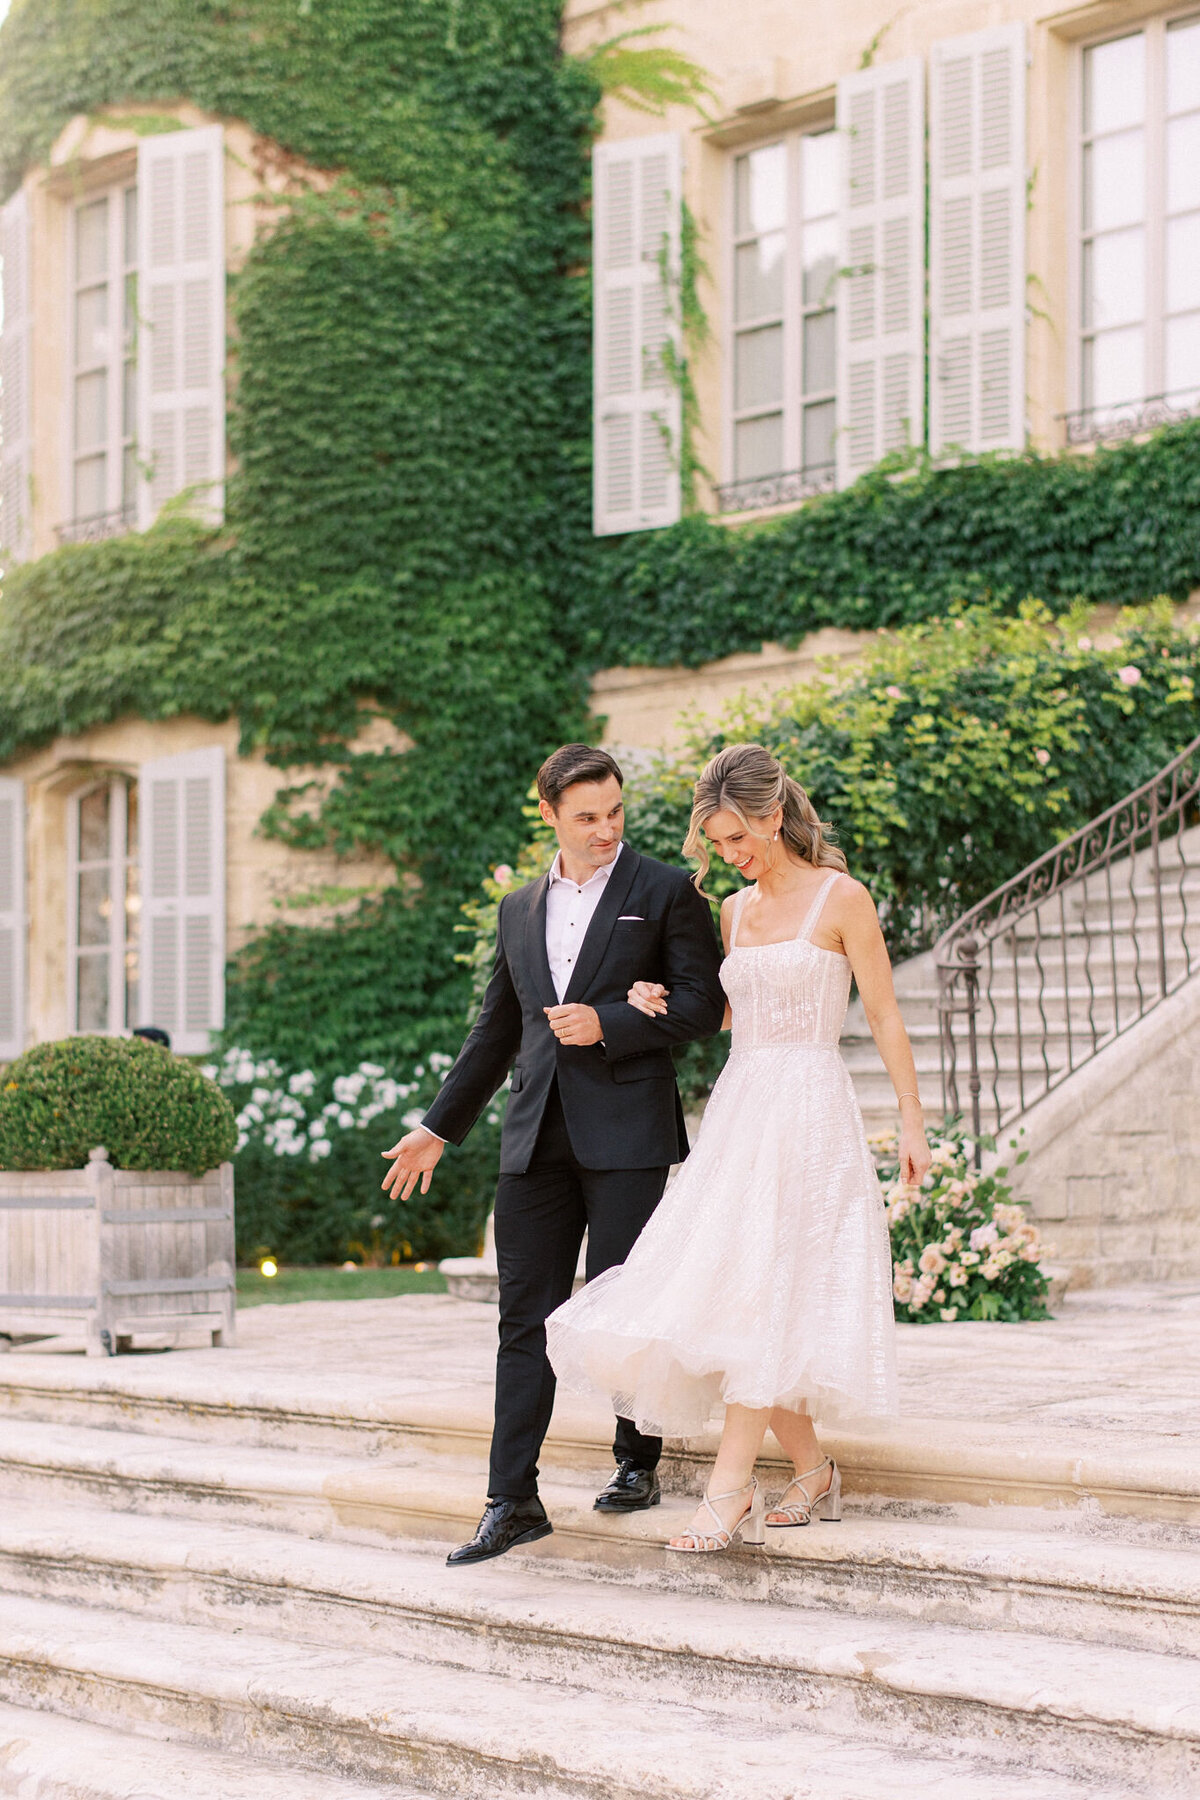 Jennifer Fox Weddings English speaking wedding planning & design agency in France crafting refined and bespoke weddings and celebrations Provence, Paris and destination MailysFortunePhotography_Jordan&Brian_712web